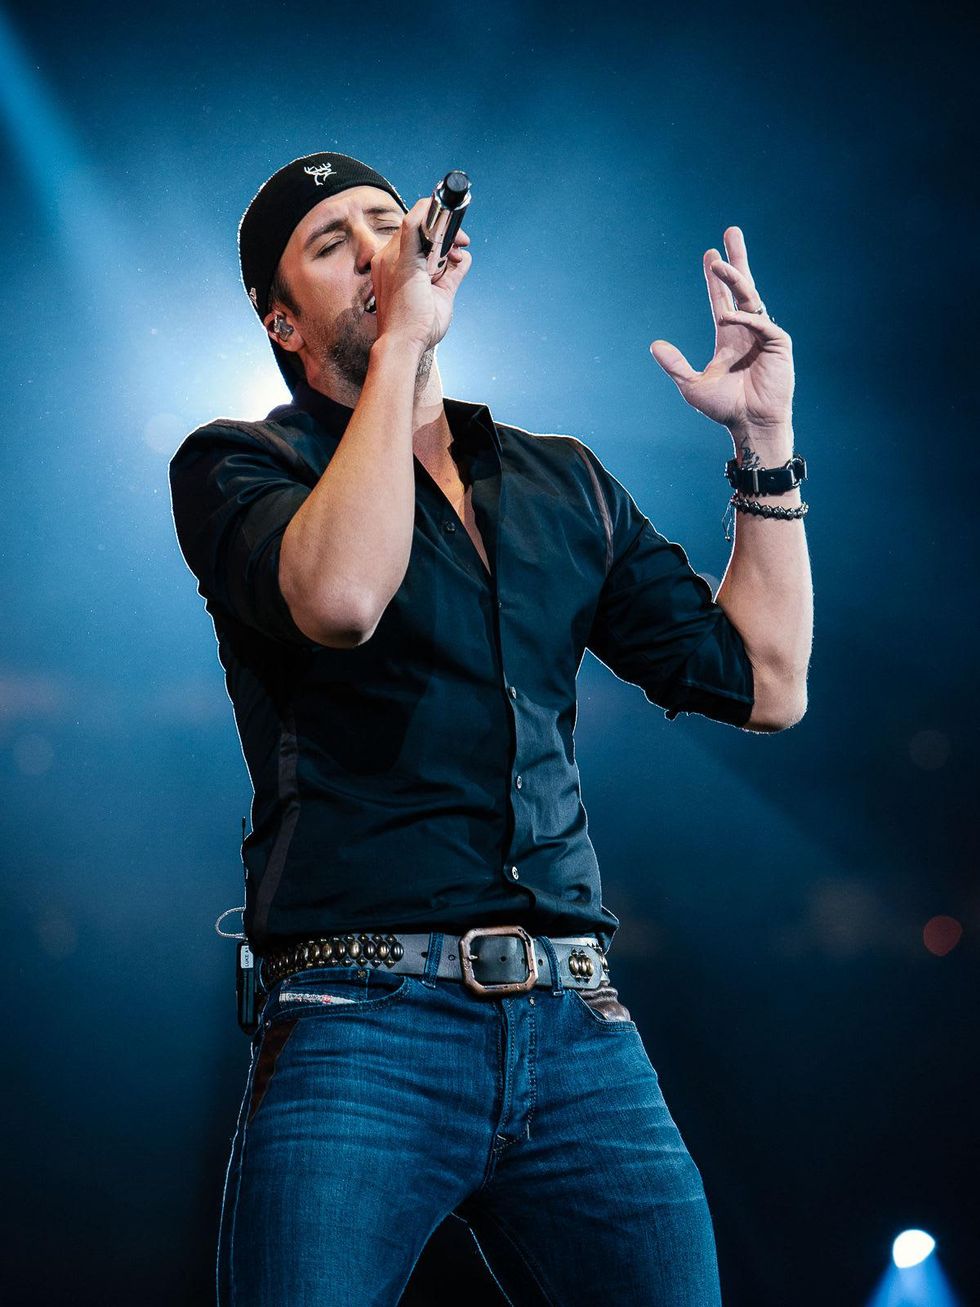 Despite way too many hip thrusts, Luke Bryan puts on a heck of a Rodeo